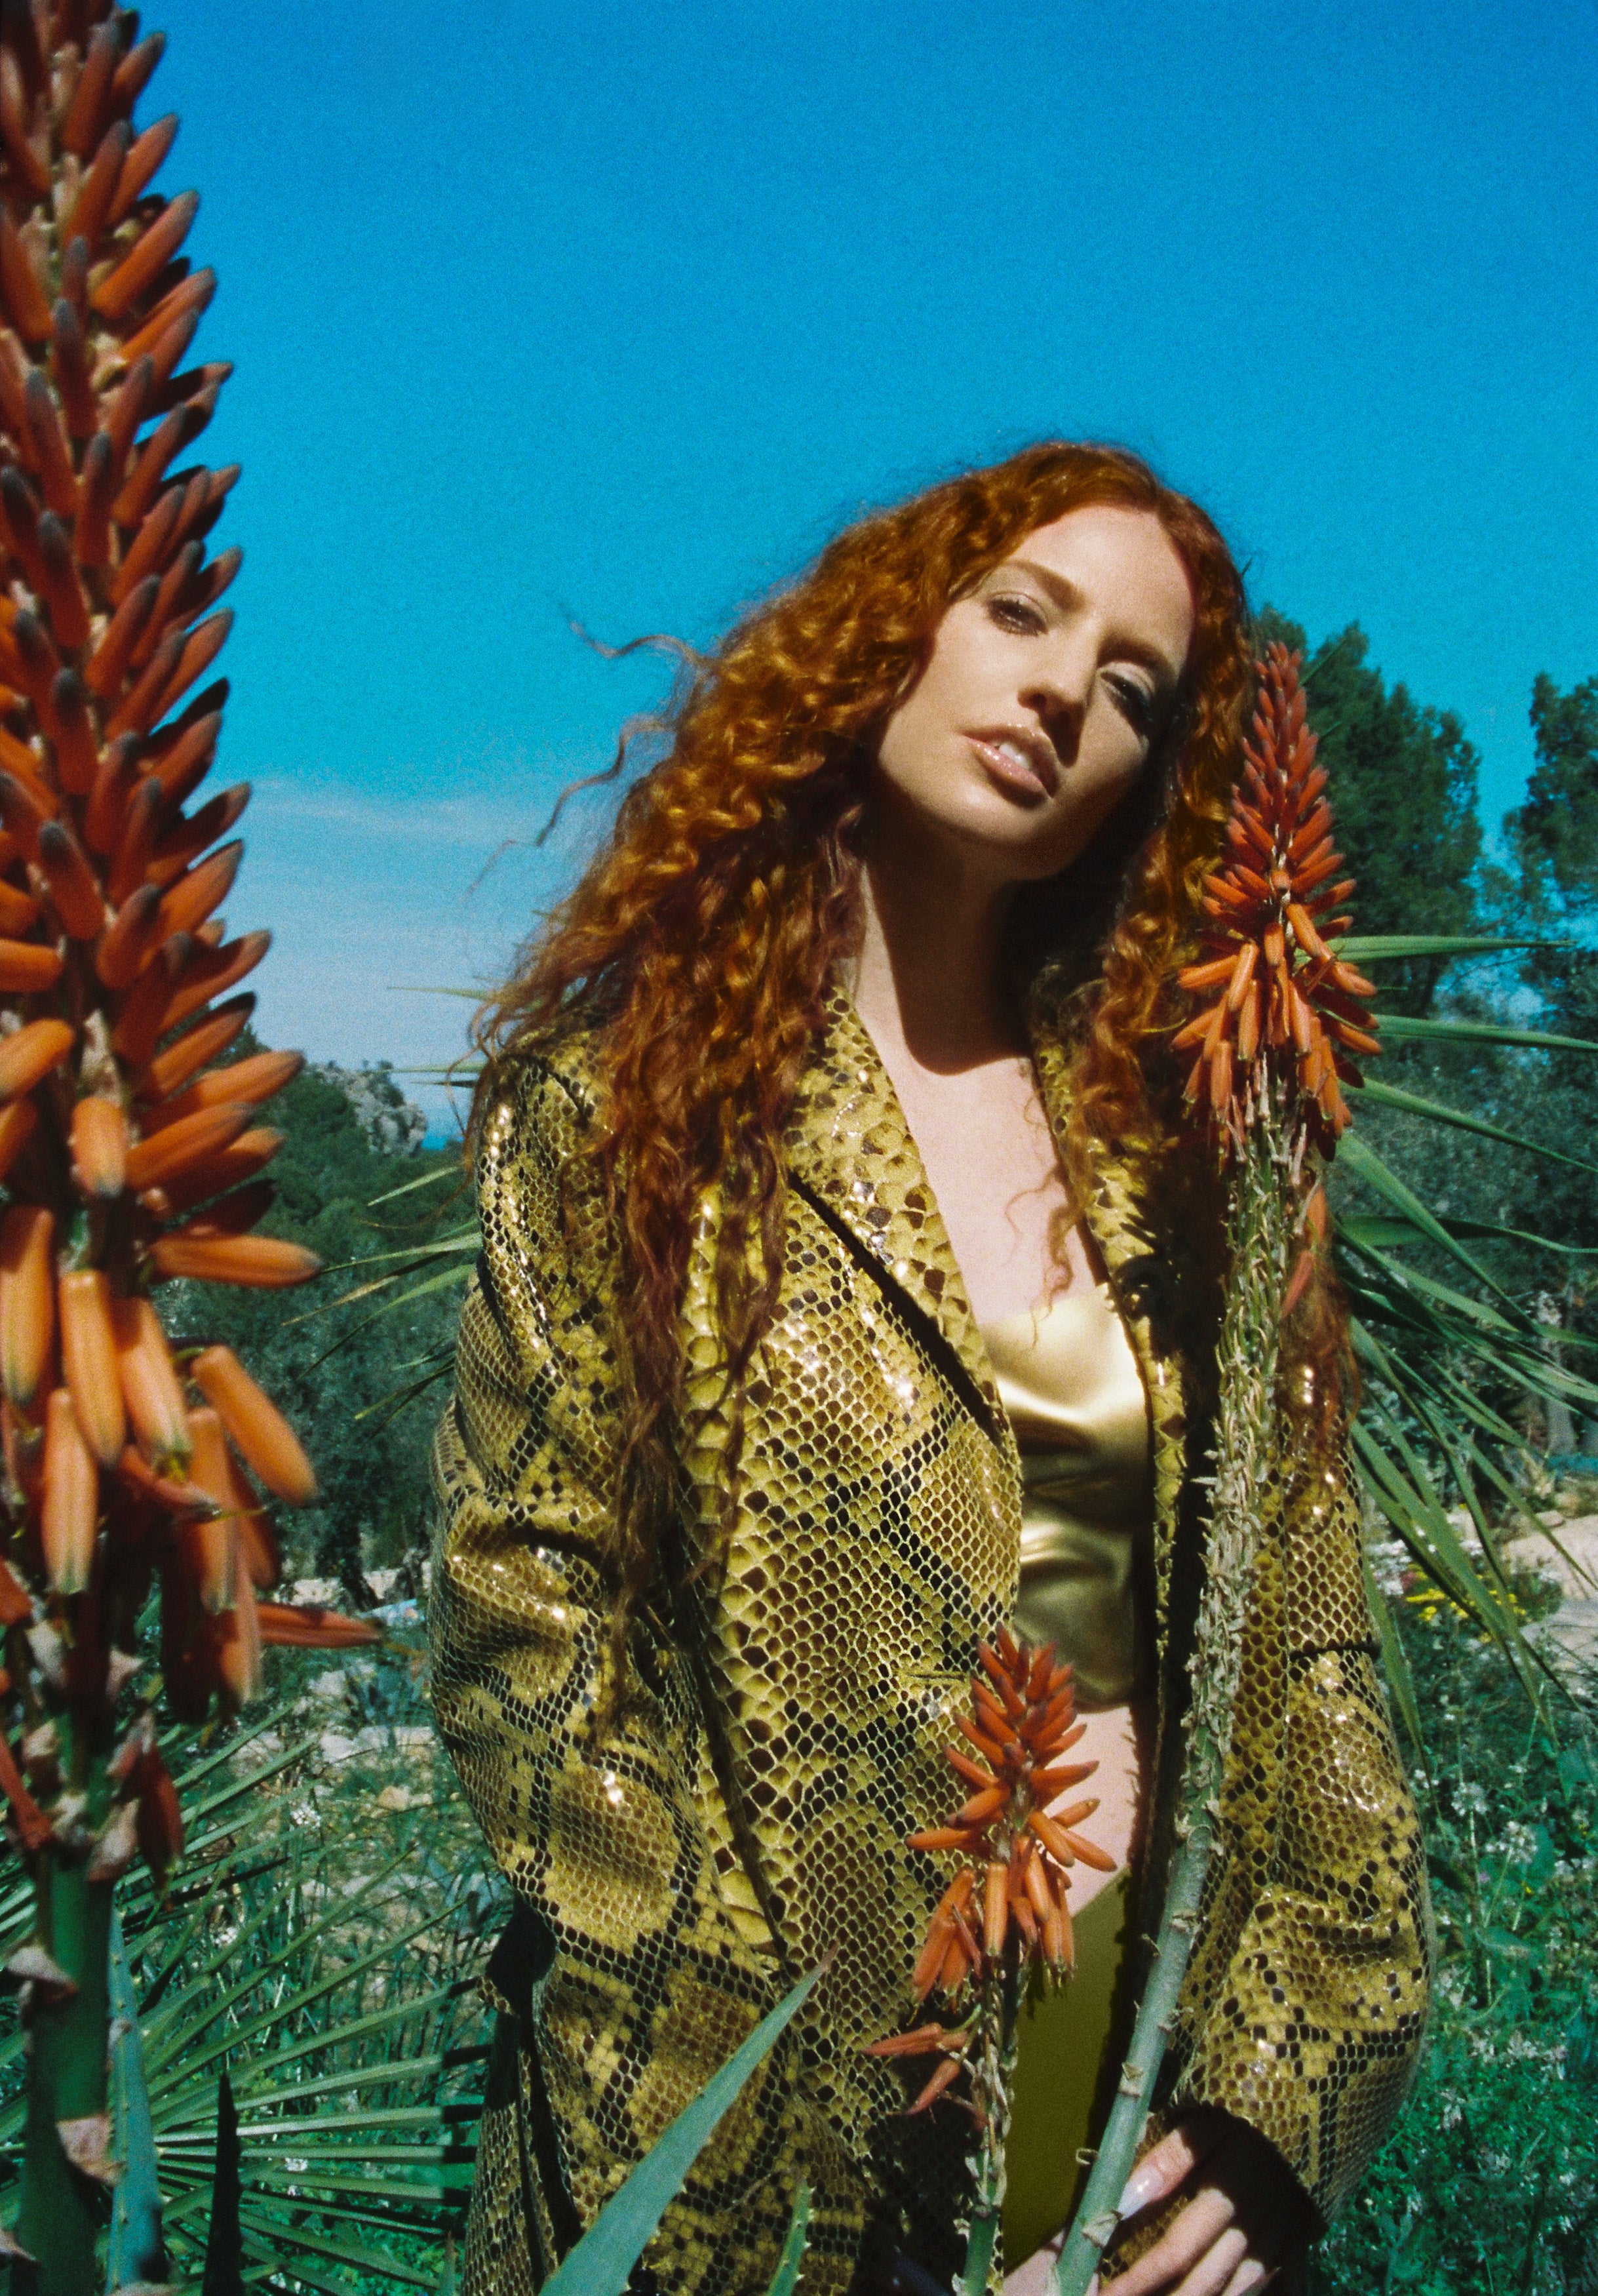 updated presale password for Jess Glynne face value tickets in Scarborough at Scarborough Open Air Theatre